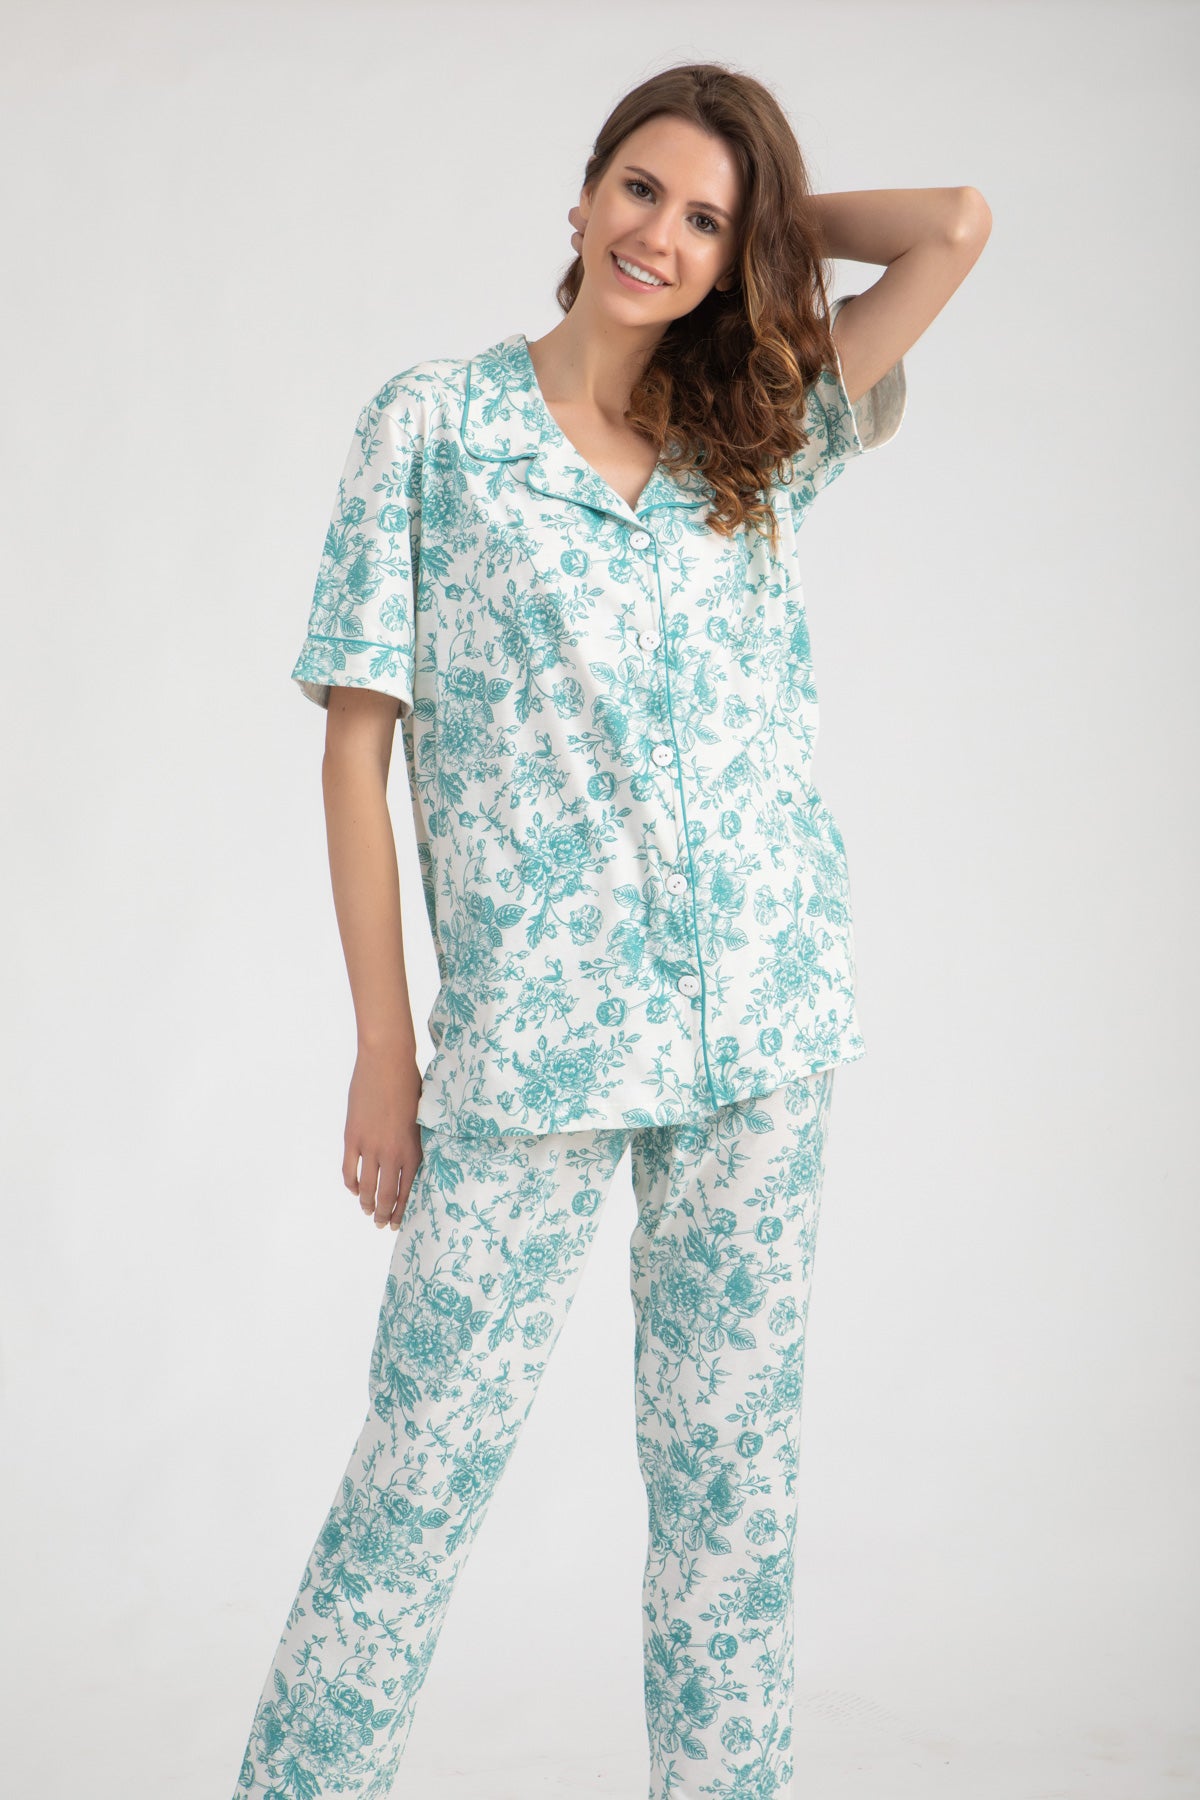 Short Sleeve All over print button down Pajama Set